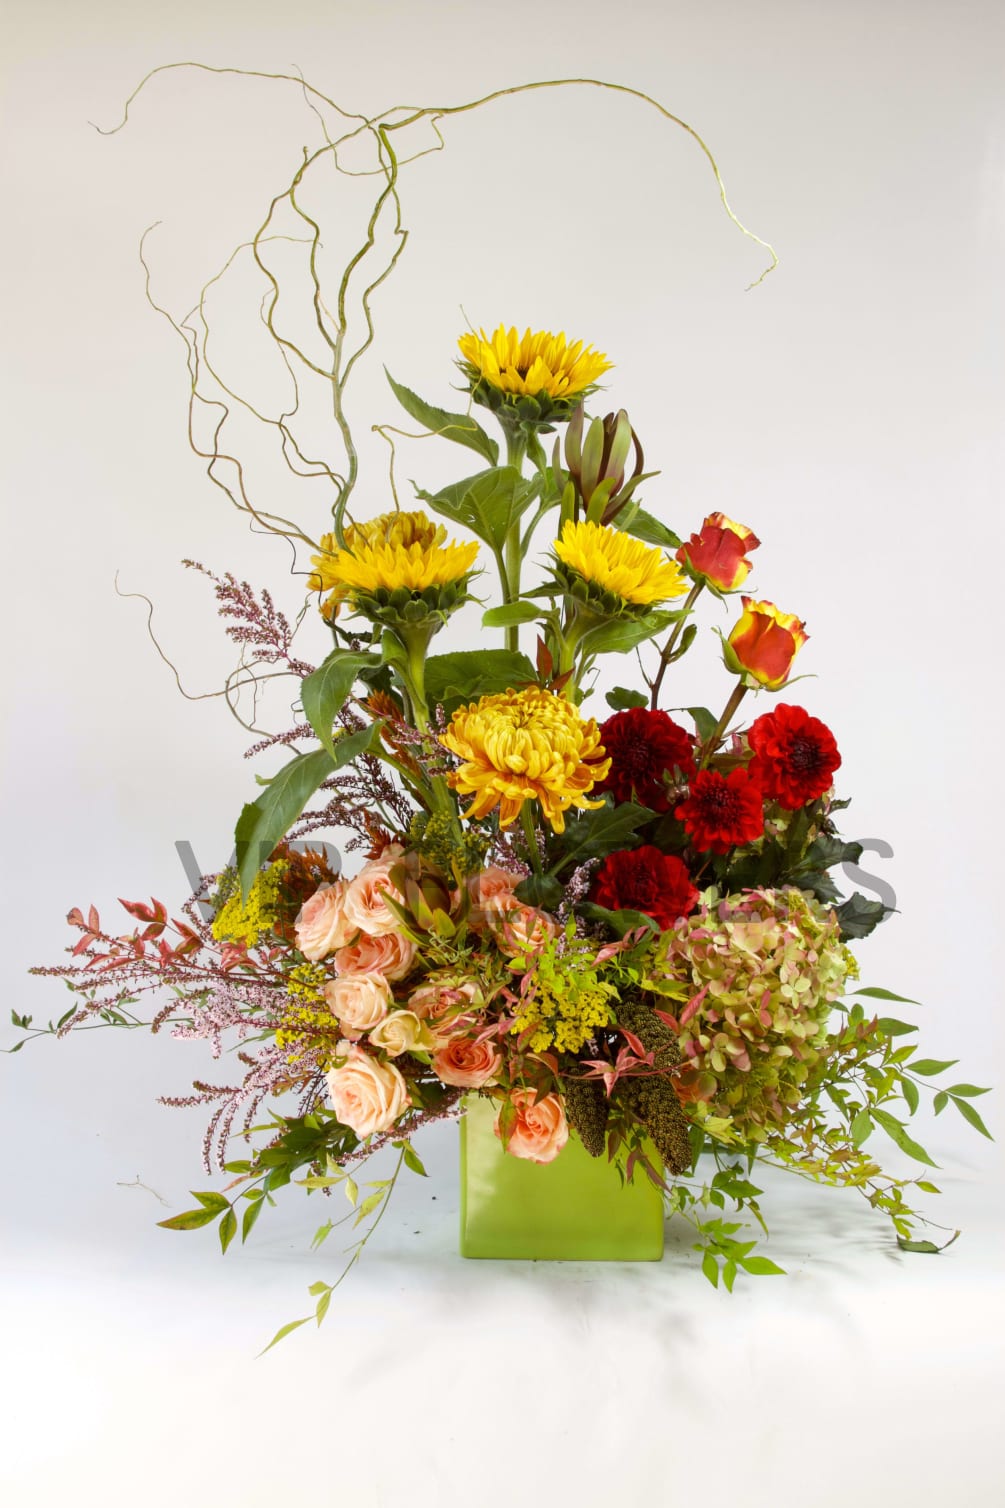 Wild has never fit a floral arrangement more precisely! This combination of